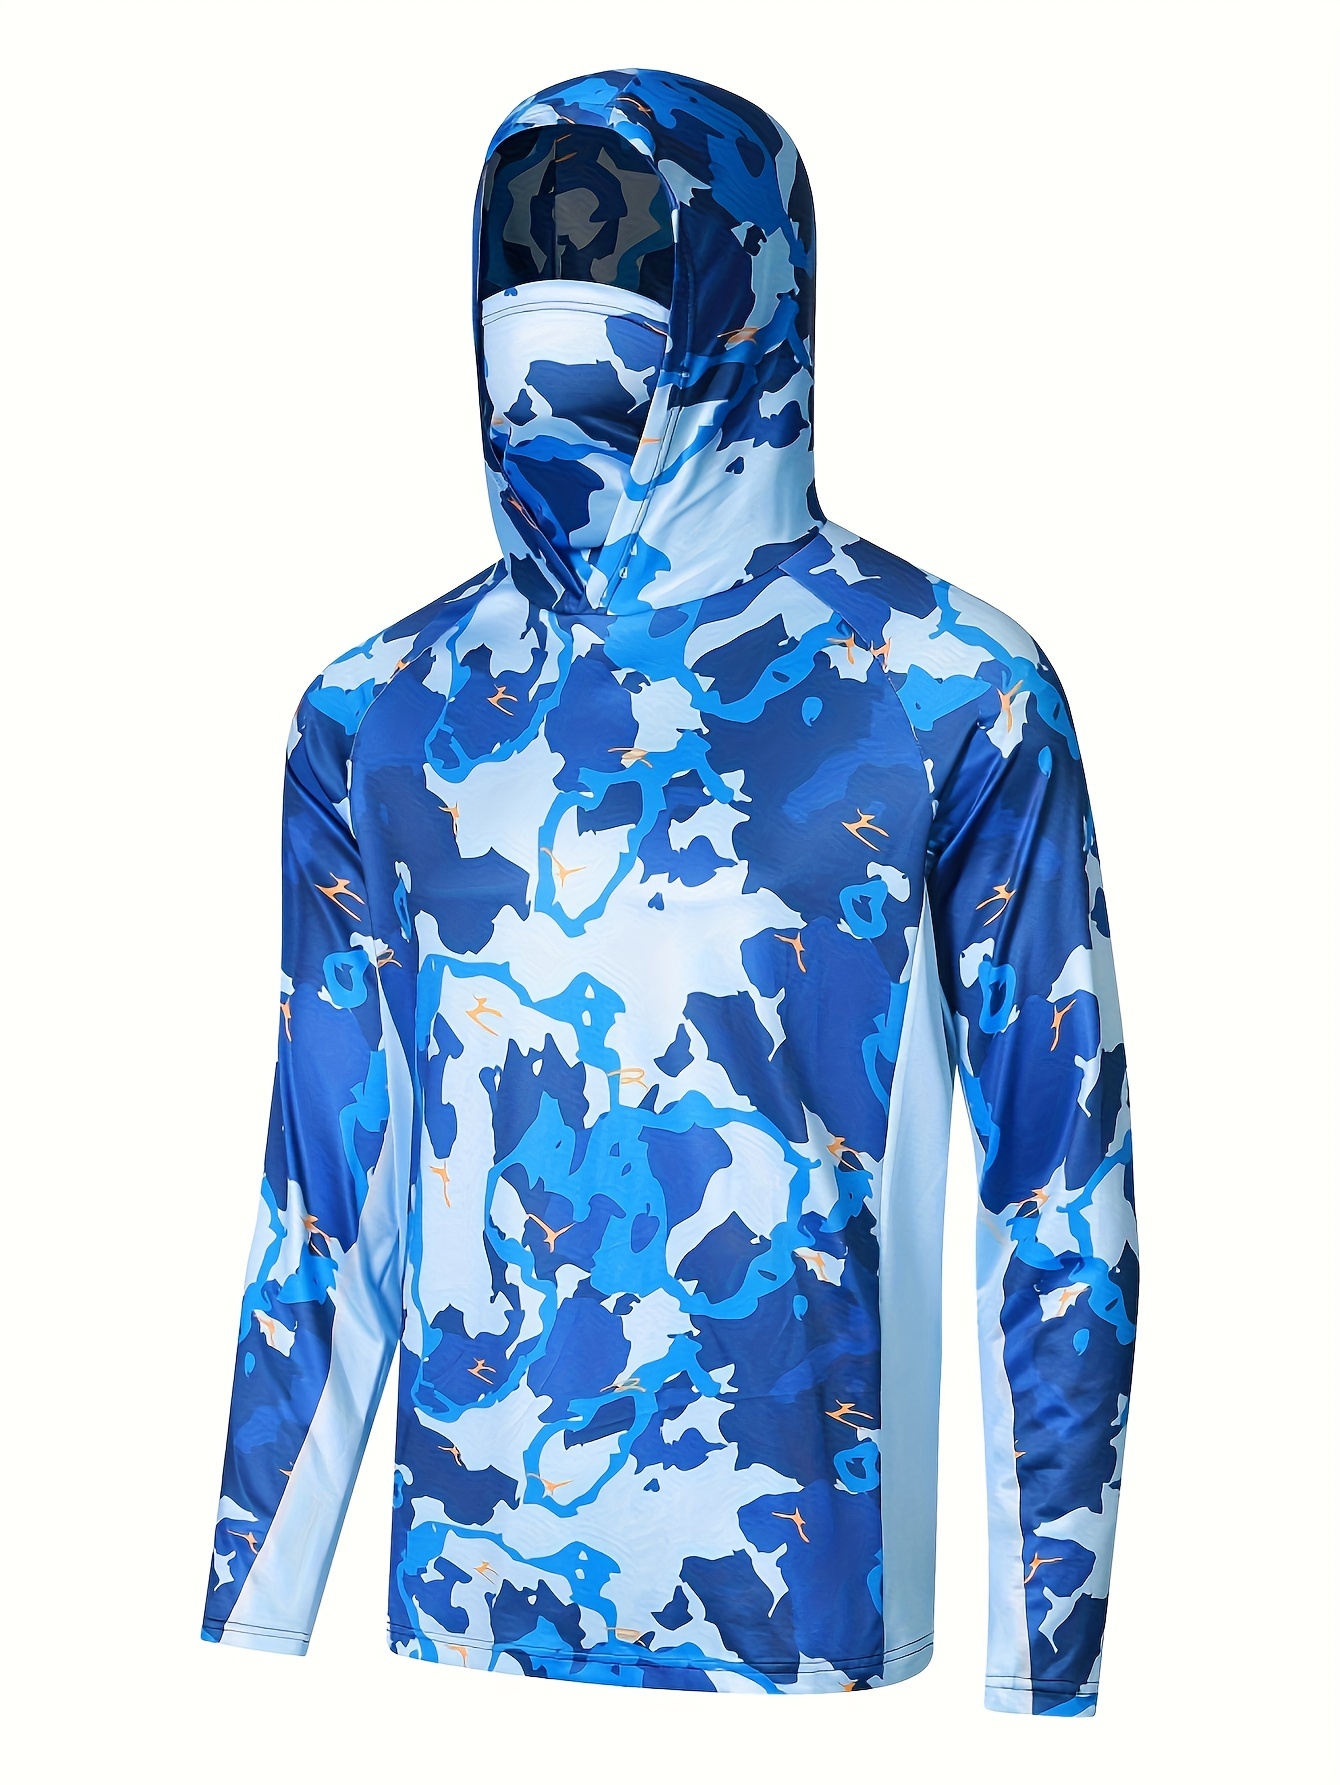 Men's Camouflage Full Body Pattern Long Sleeve Hoodie with Mask, Sun Protection Fishing Shirt Breathable Quick Dry Hooded Fishing Jersey for